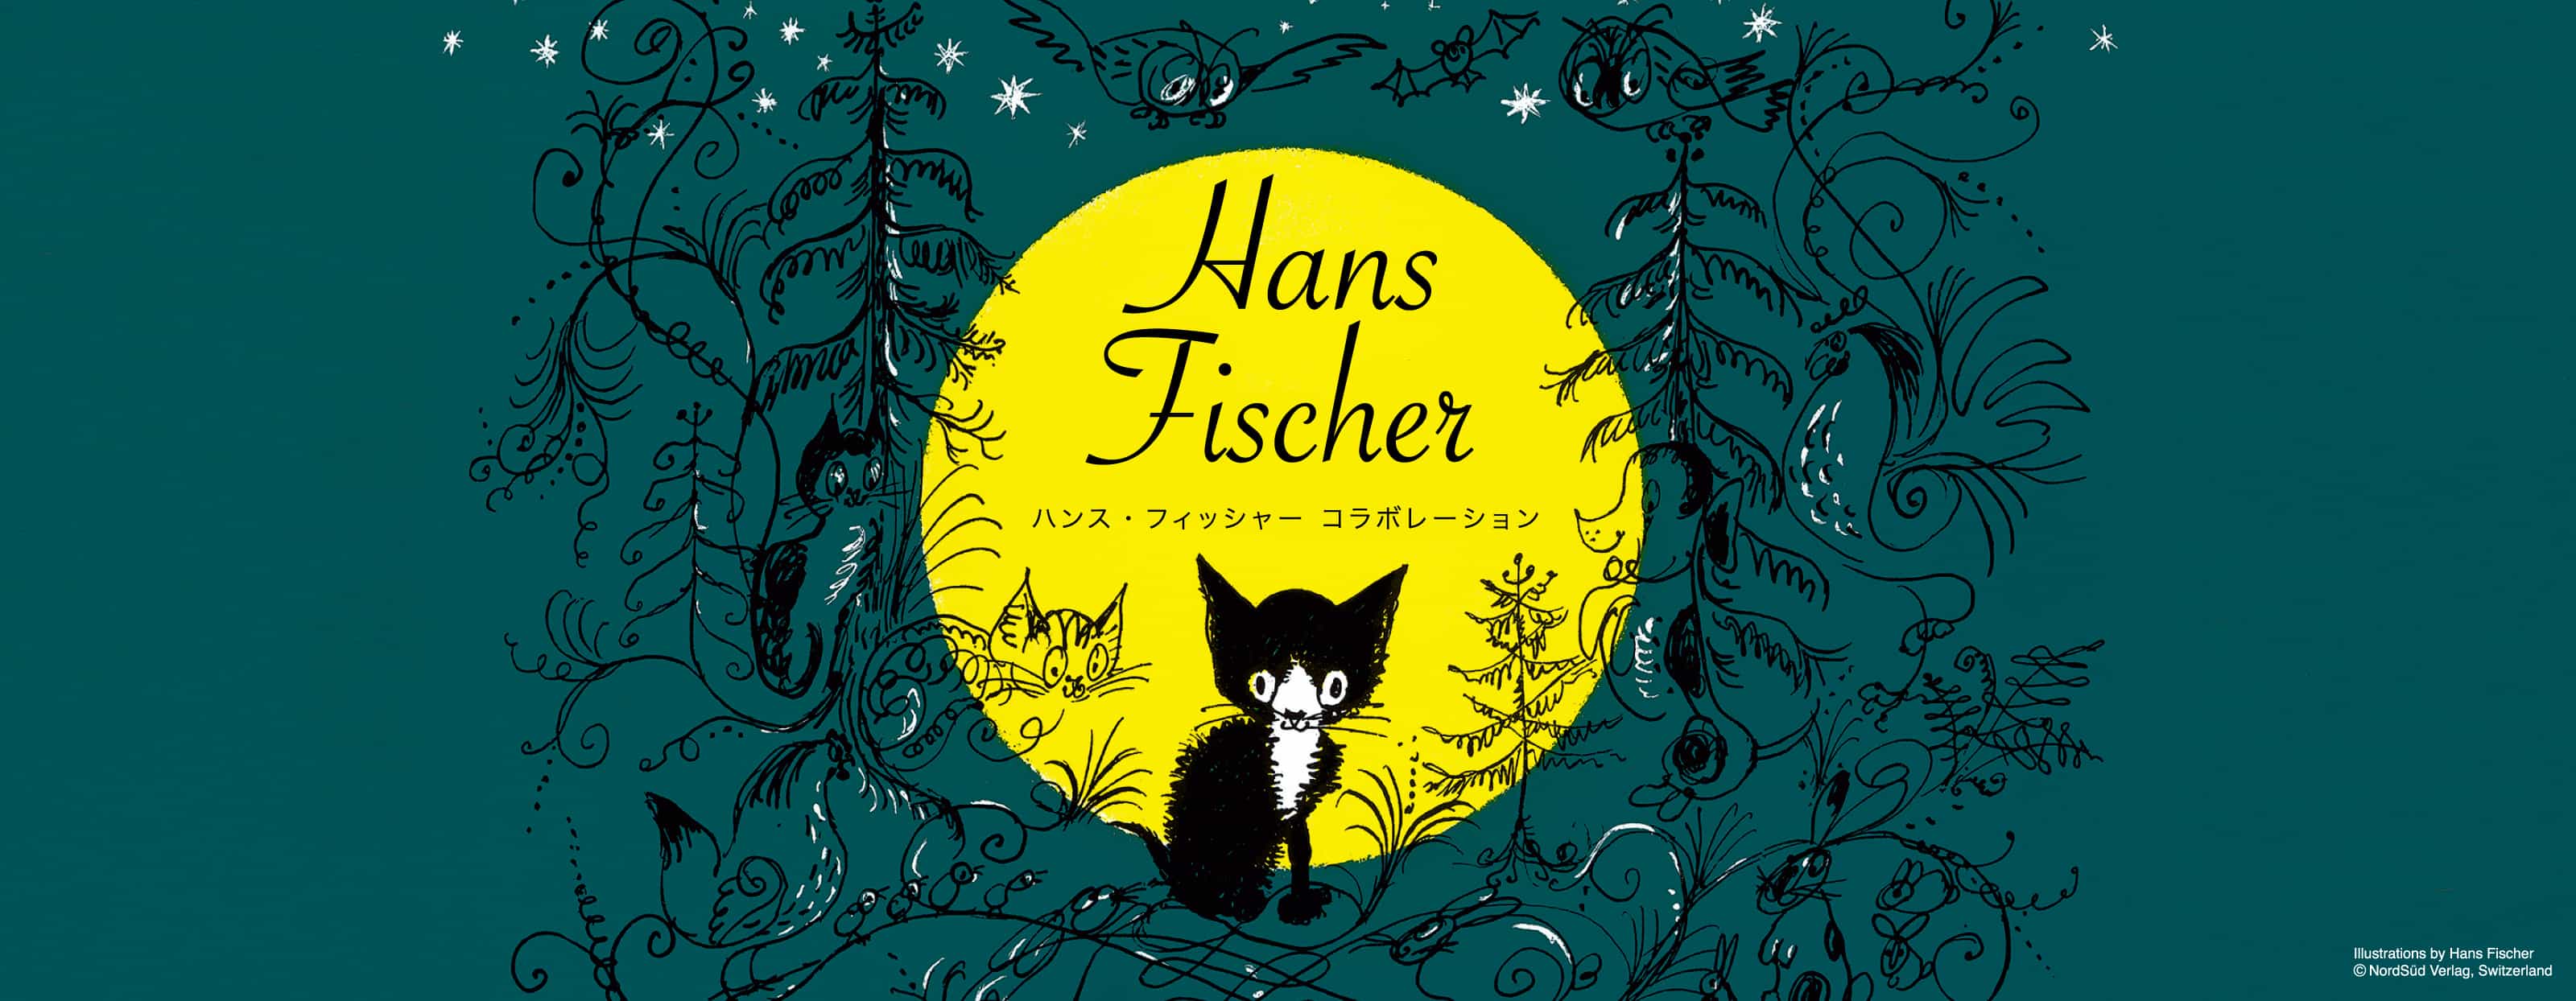 Hans Fischer (1909 – 1958), one of Switzerland's leading painter, has worked on murals, prints, and textbook illustrations. A picture book for his own children was later published and continues to be loved by children around the world. Many items have appeared from his popular works "The Birthday", "Pitschi", and "In Fairyland". Enjoy the entertaining and beloved world of Hans Fischer.[ssorder:-20211117]